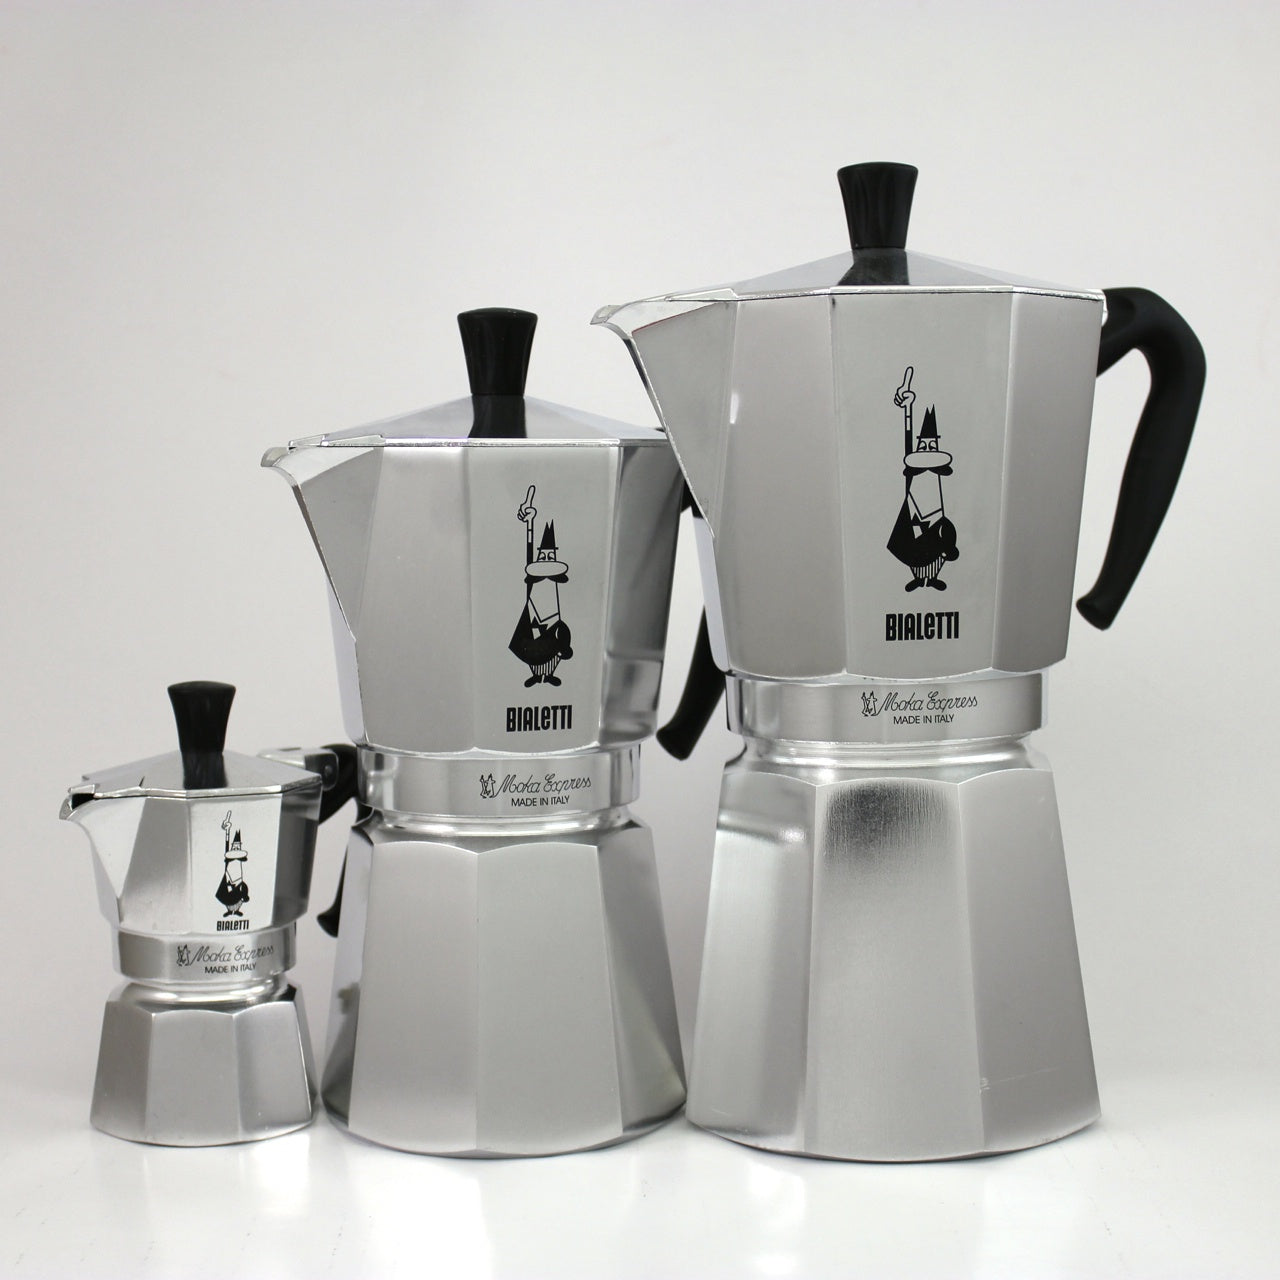 Bialetti Moka Express Cafe Coffee Maker Made In Italy 1 Cup